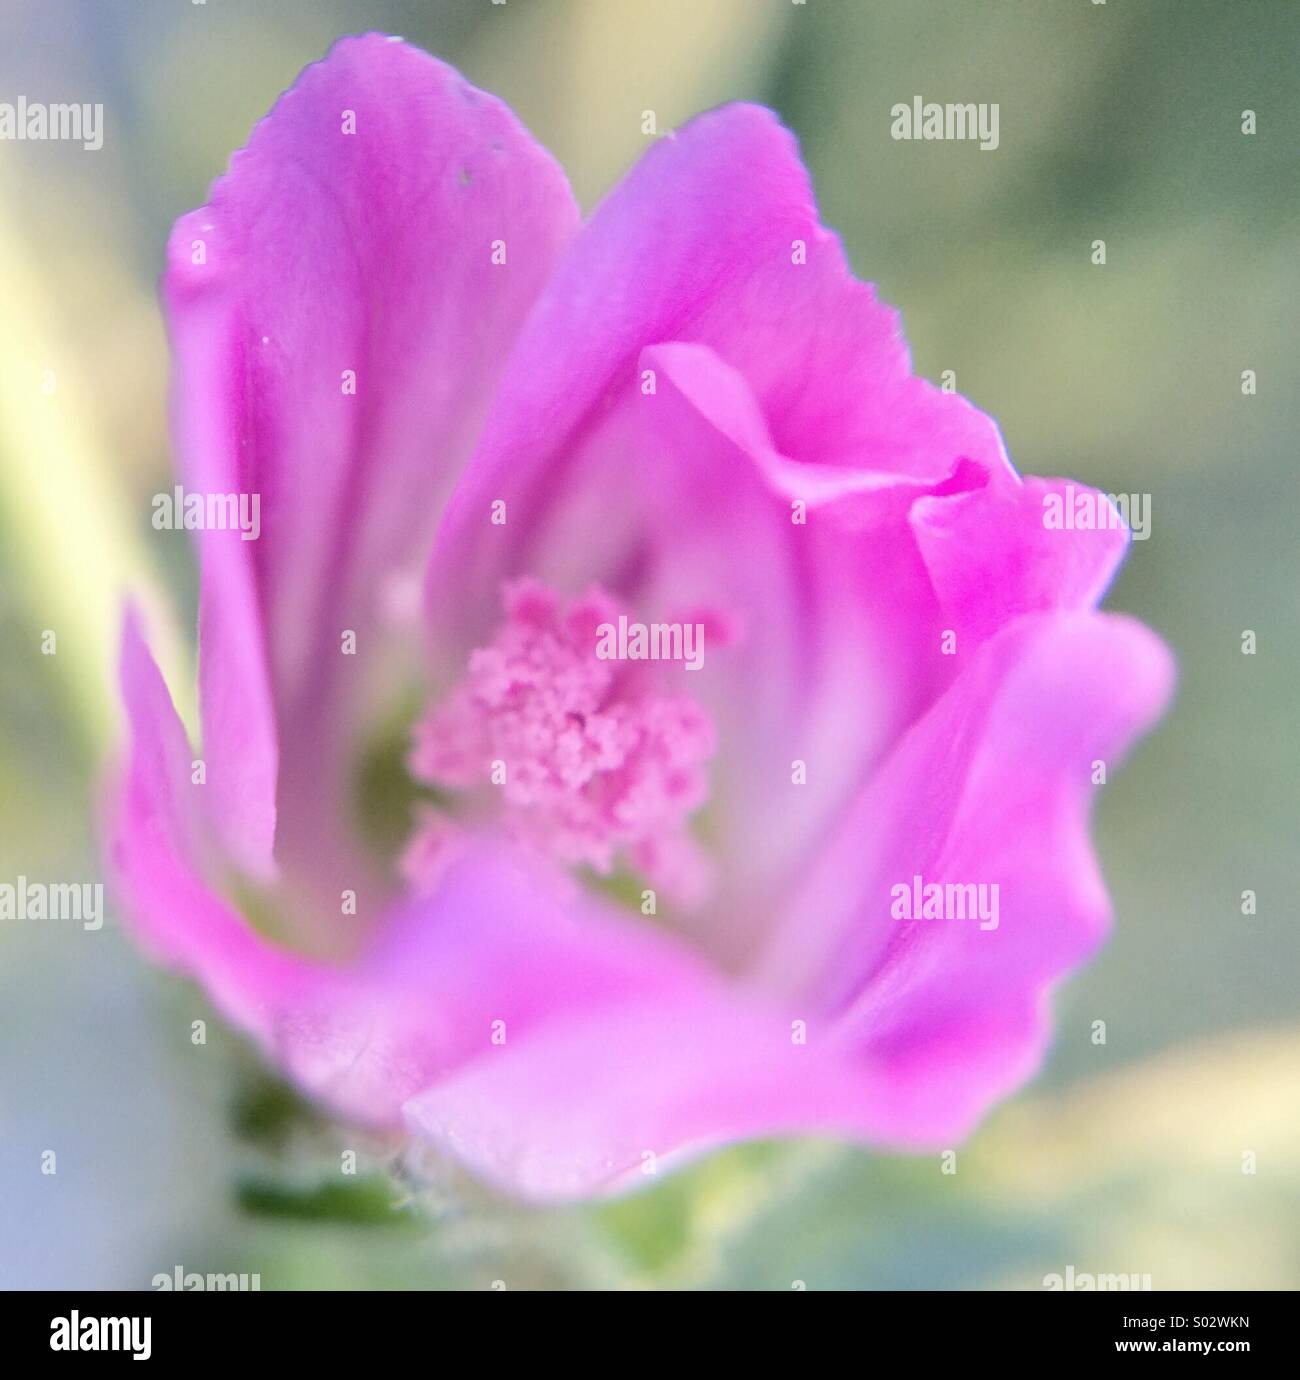 Macro of a pink little flower. Stock Photo